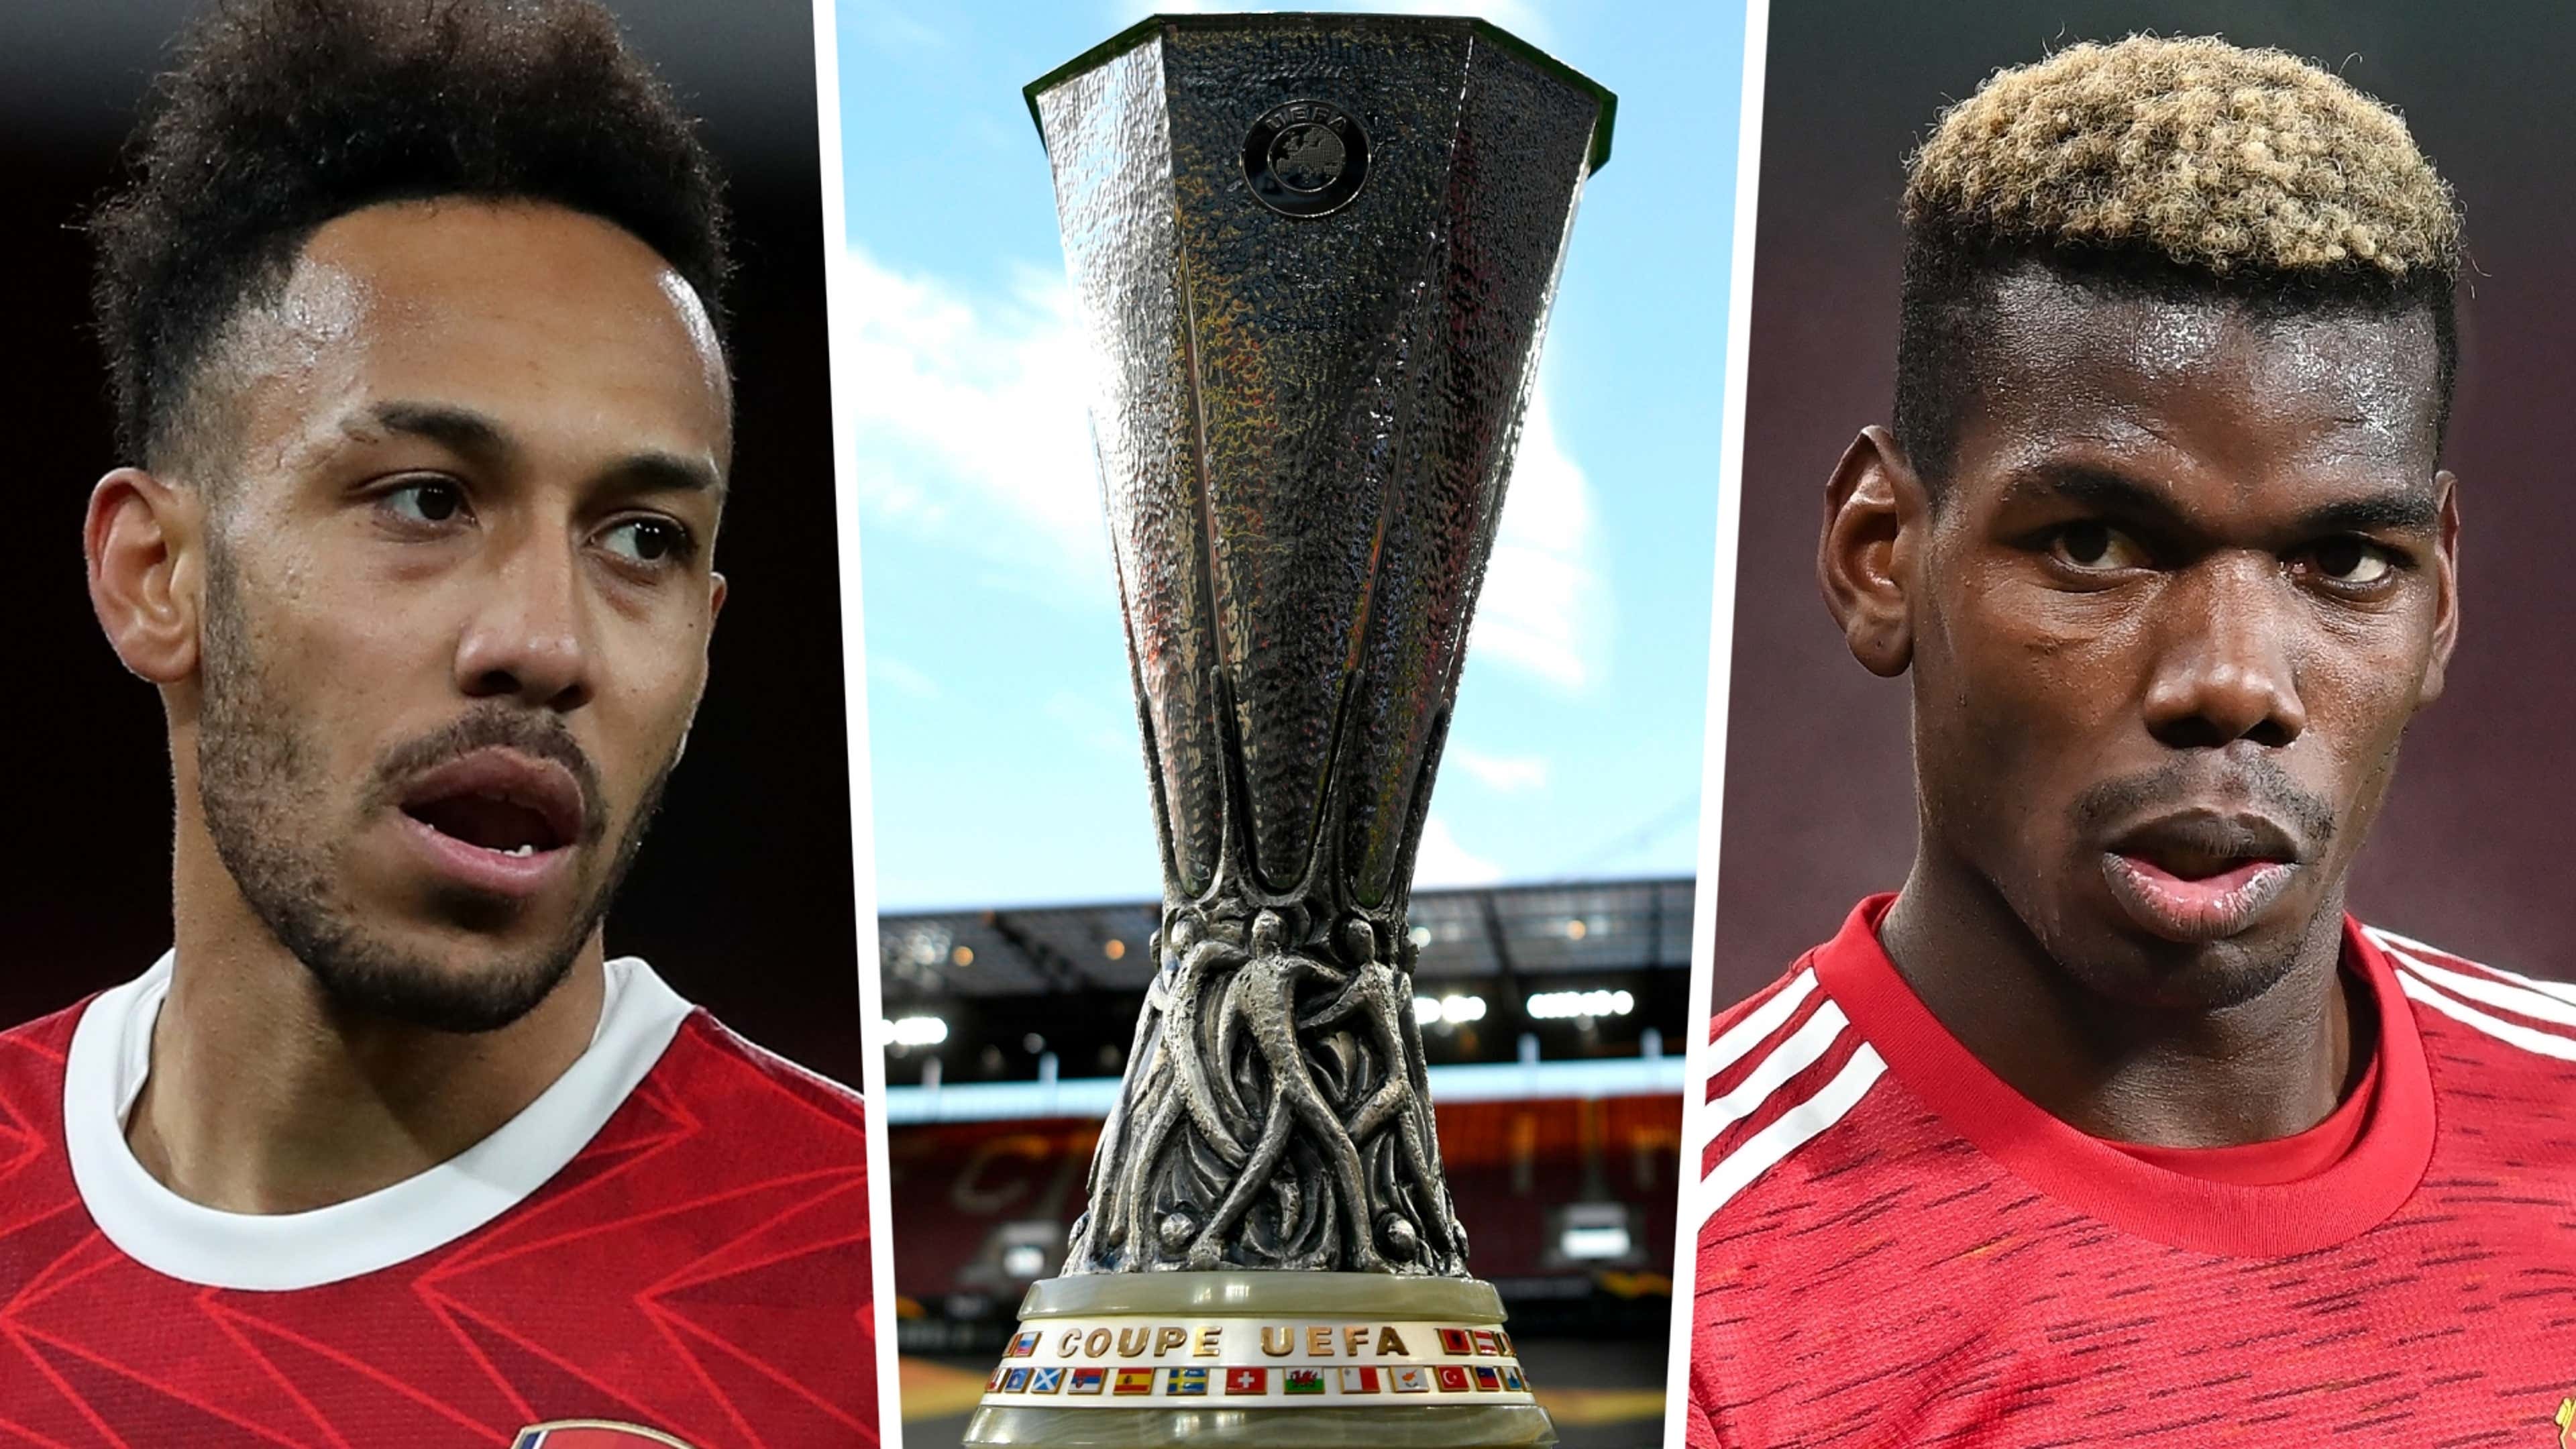 Champions League & Europa League knockout stage draws LIVE: Man Utd, Real  Madrid, Barcelona & more learn opponents